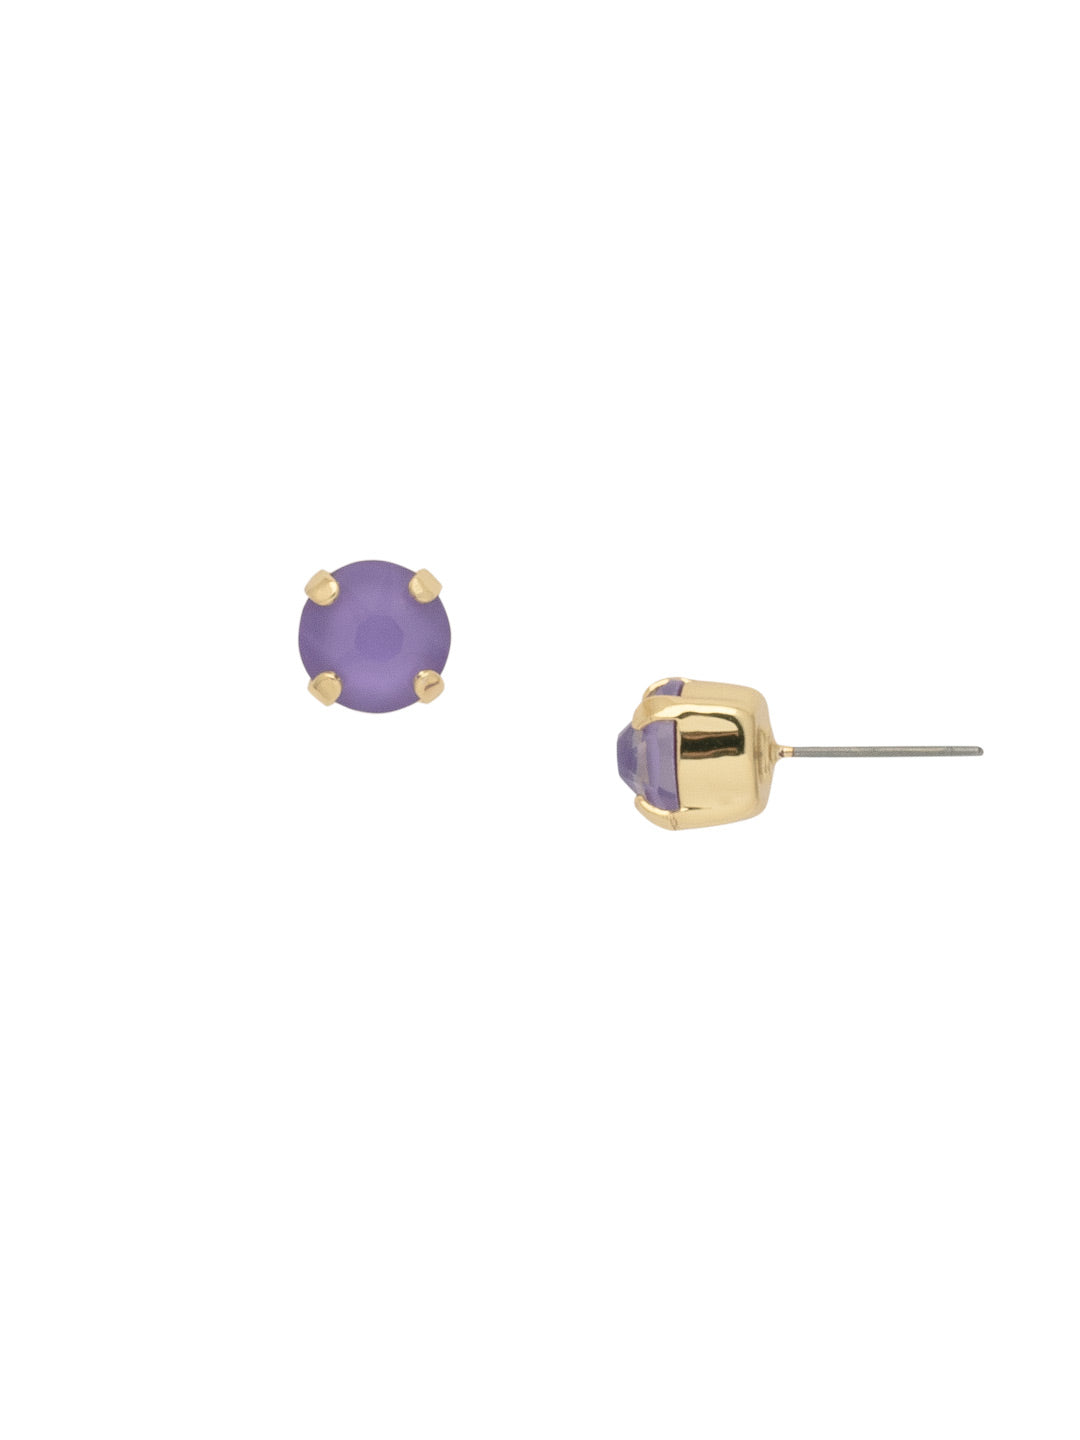 Simple Stud Earrings - EFC99BGHBR - <p>The Simple Stud Earrings feature a single solid crystal on a surgical steel post, creating a small but sparkly everyday staple! Need help picking a stud? <a href="https://www.sorrelli.com/blogs/sisterhood/round-stud-earrings-101-a-rundown-of-sizes-styles-and-sparkle">Check out our size guide!</a> From Sorrelli's Happy Birthday Redux collection in our Bright Gold-tone finish.</p>